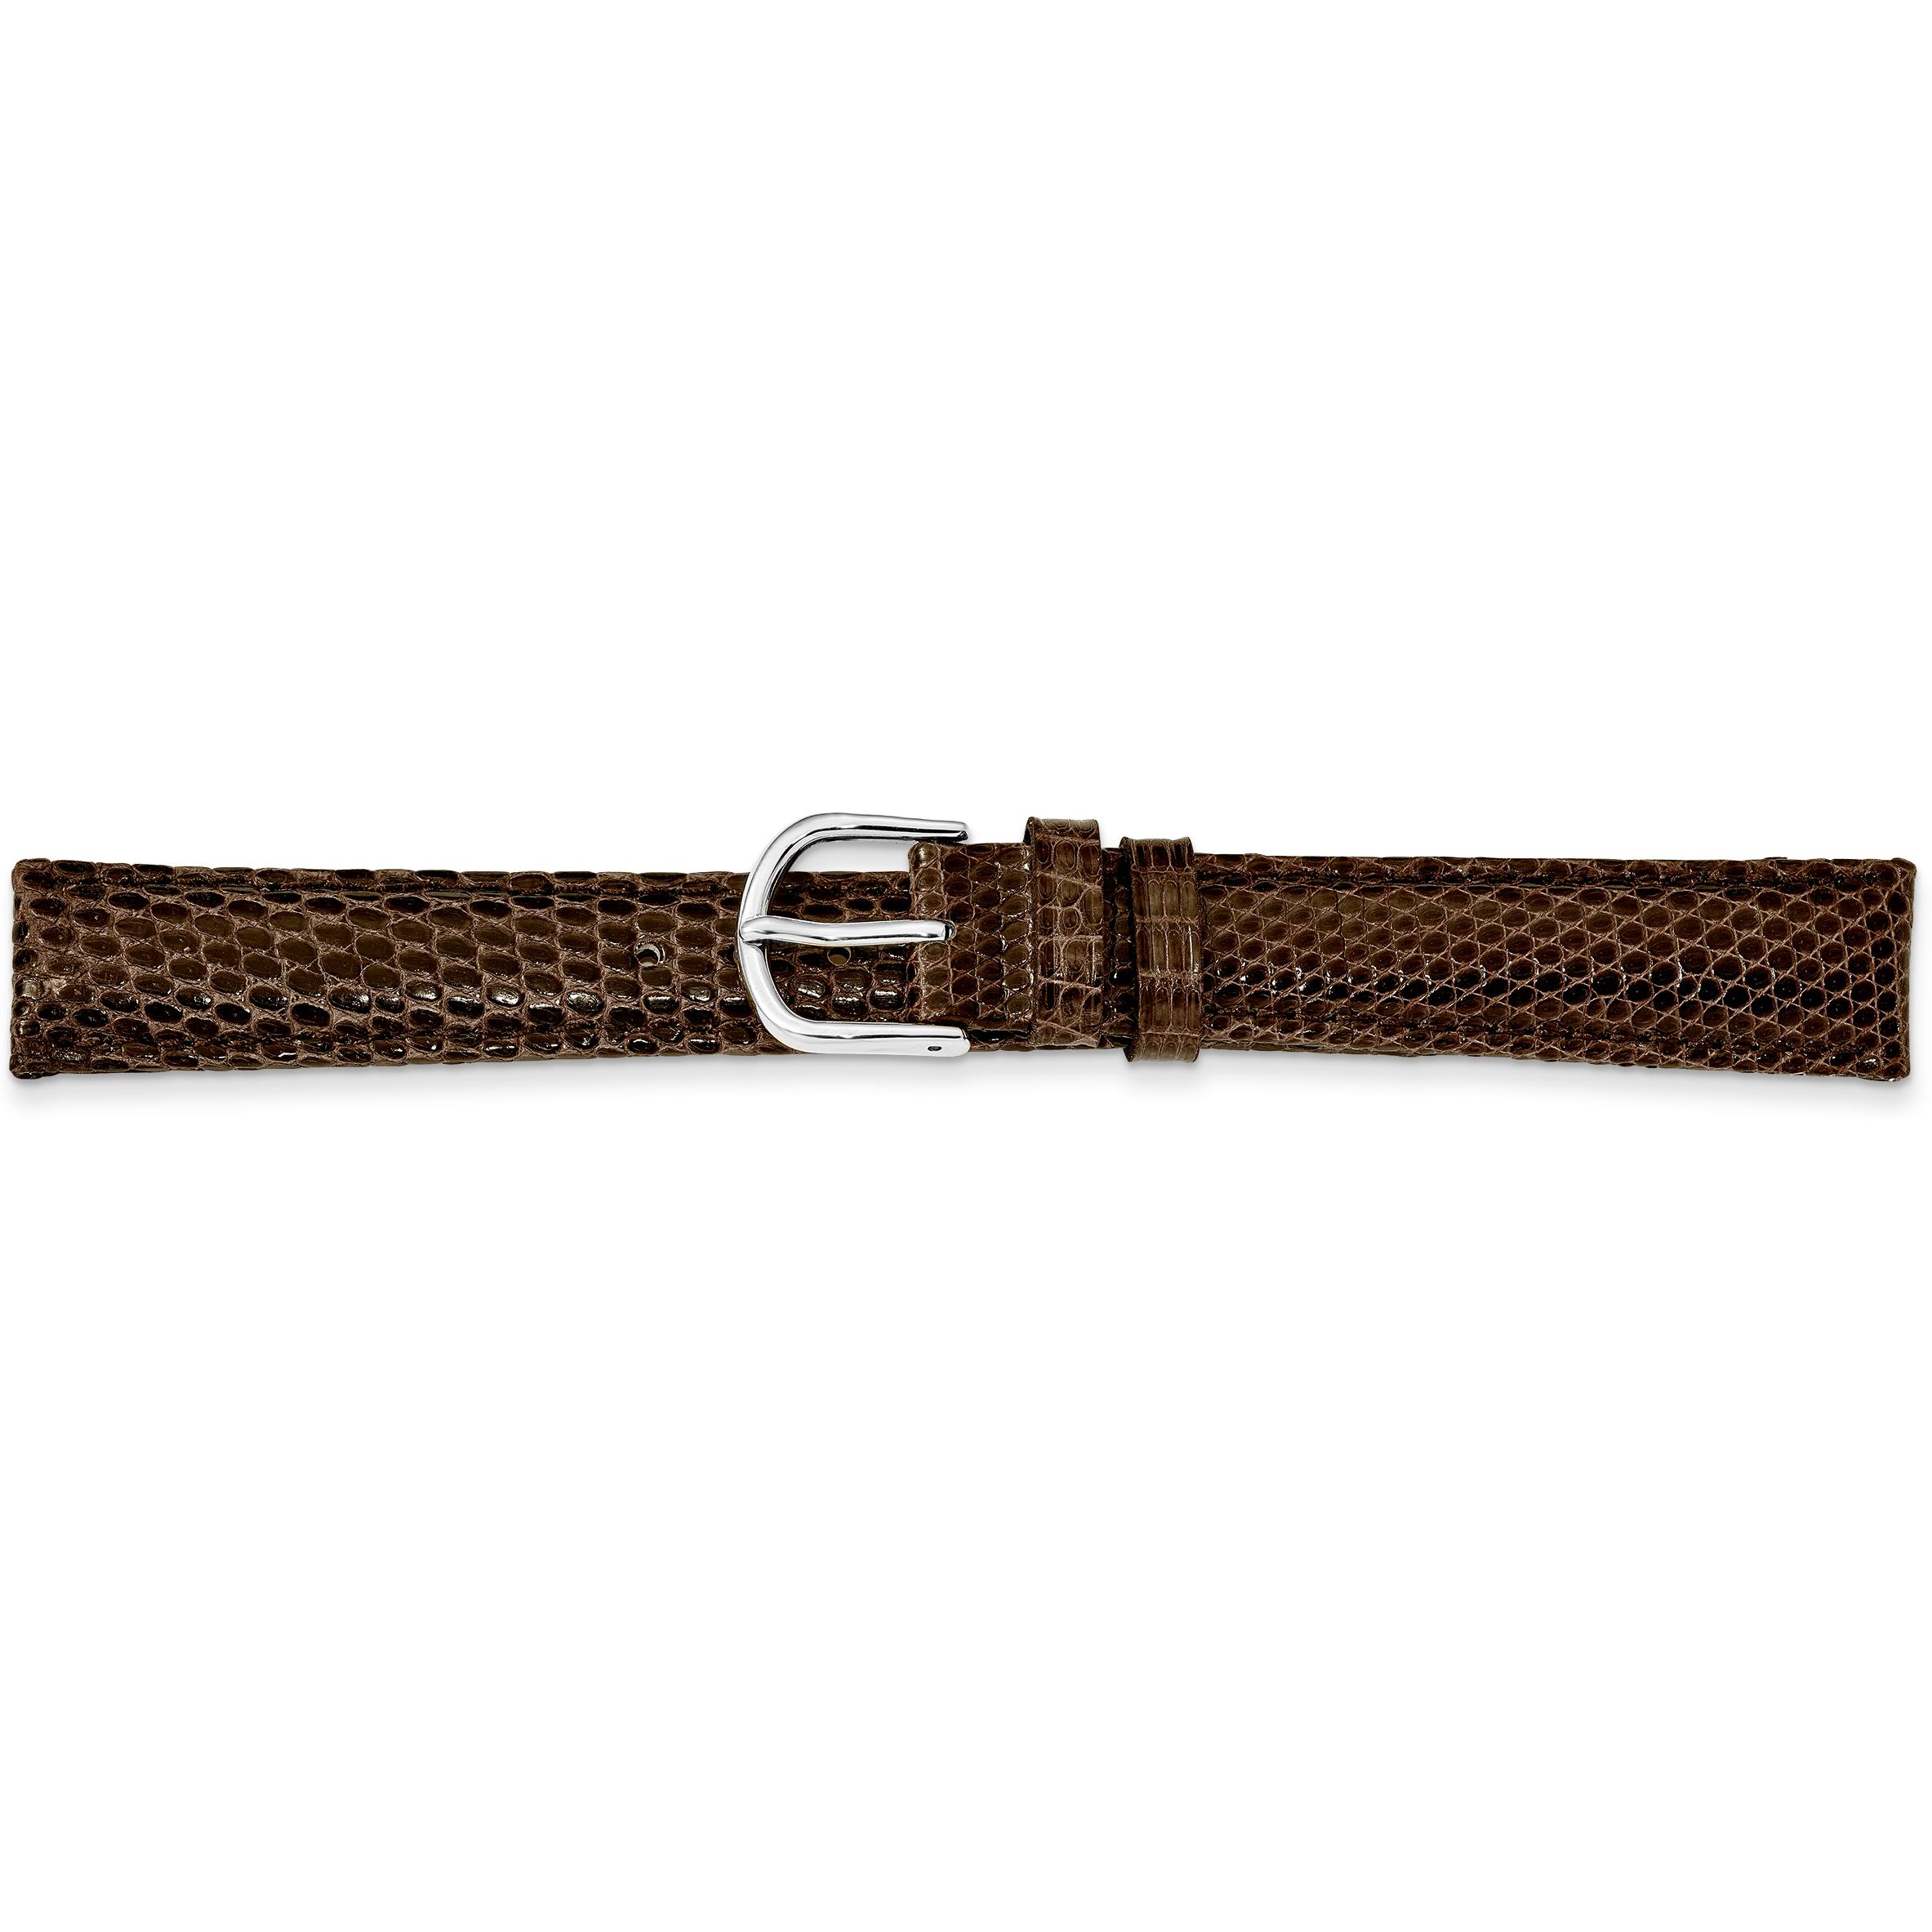 Findingking de Beer Brown Genuine Lizard Leather Watch Band 18mm Silver Color